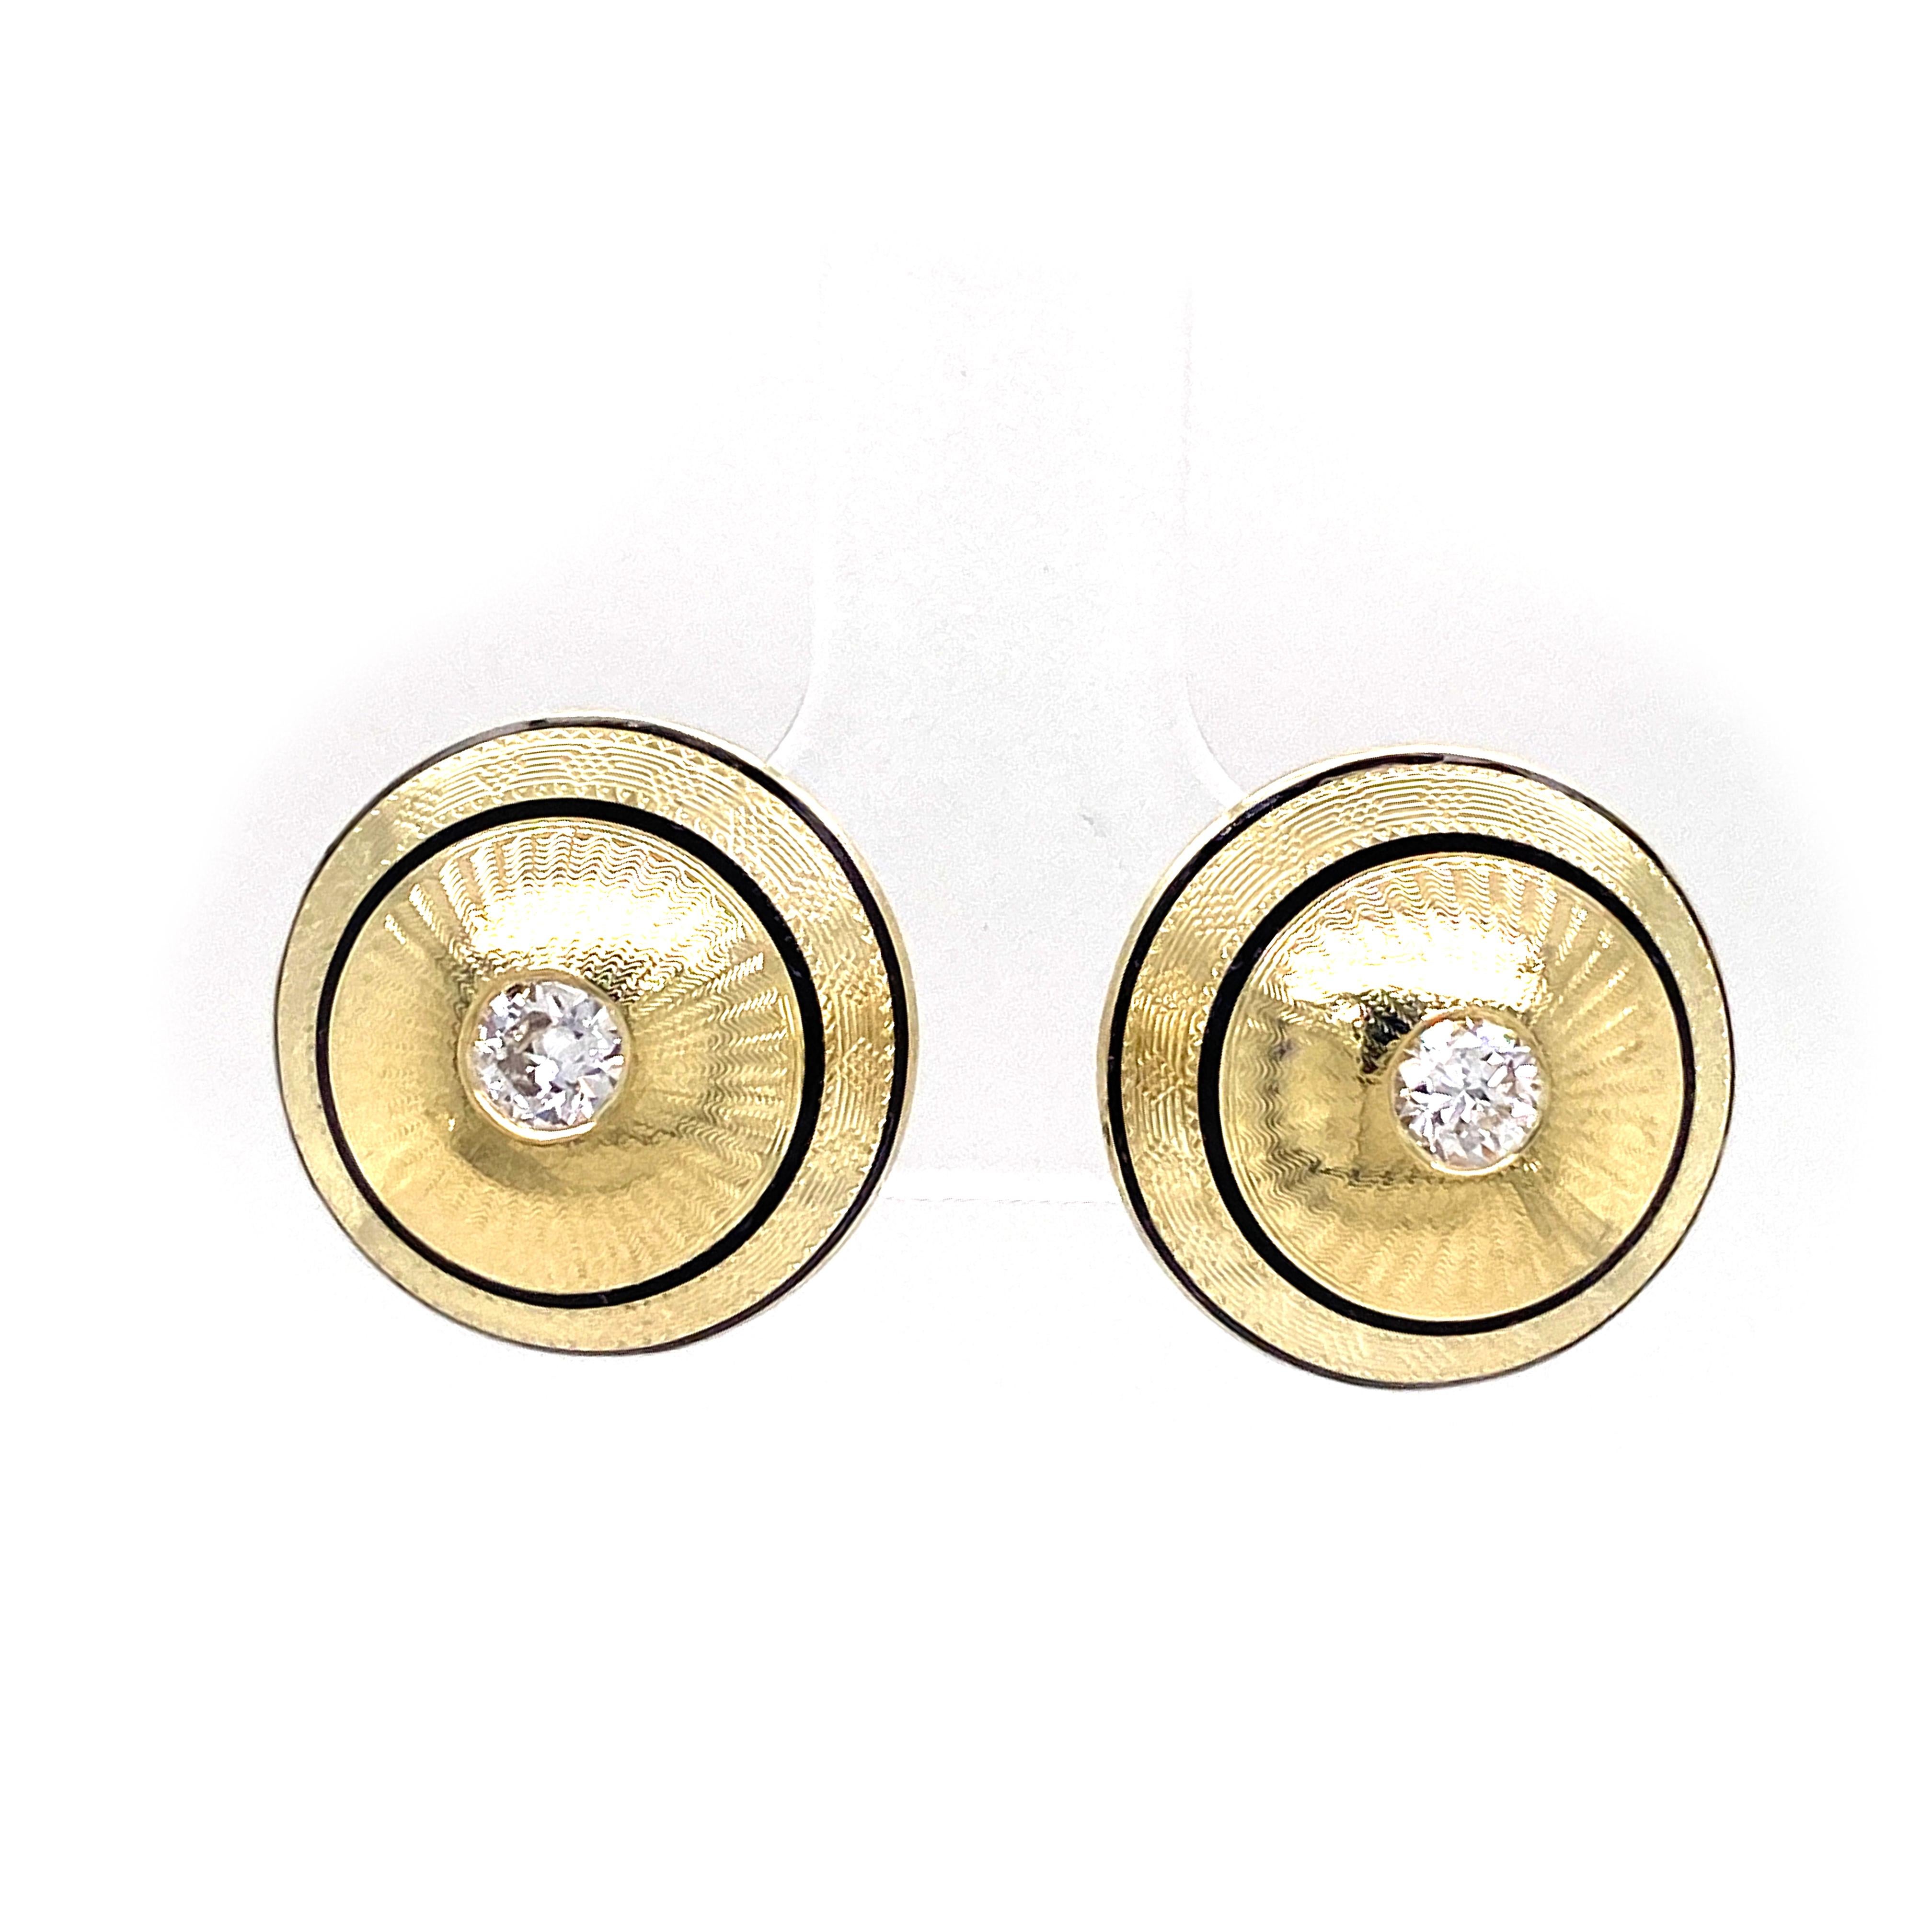 These perky dome-shaped earrings were the fronts of old-fashioned sleeve links -- the type that look like two buttons connected back to back.  The back pieces look exactly the same, except they don't have diamonds.  (We made those into earrings